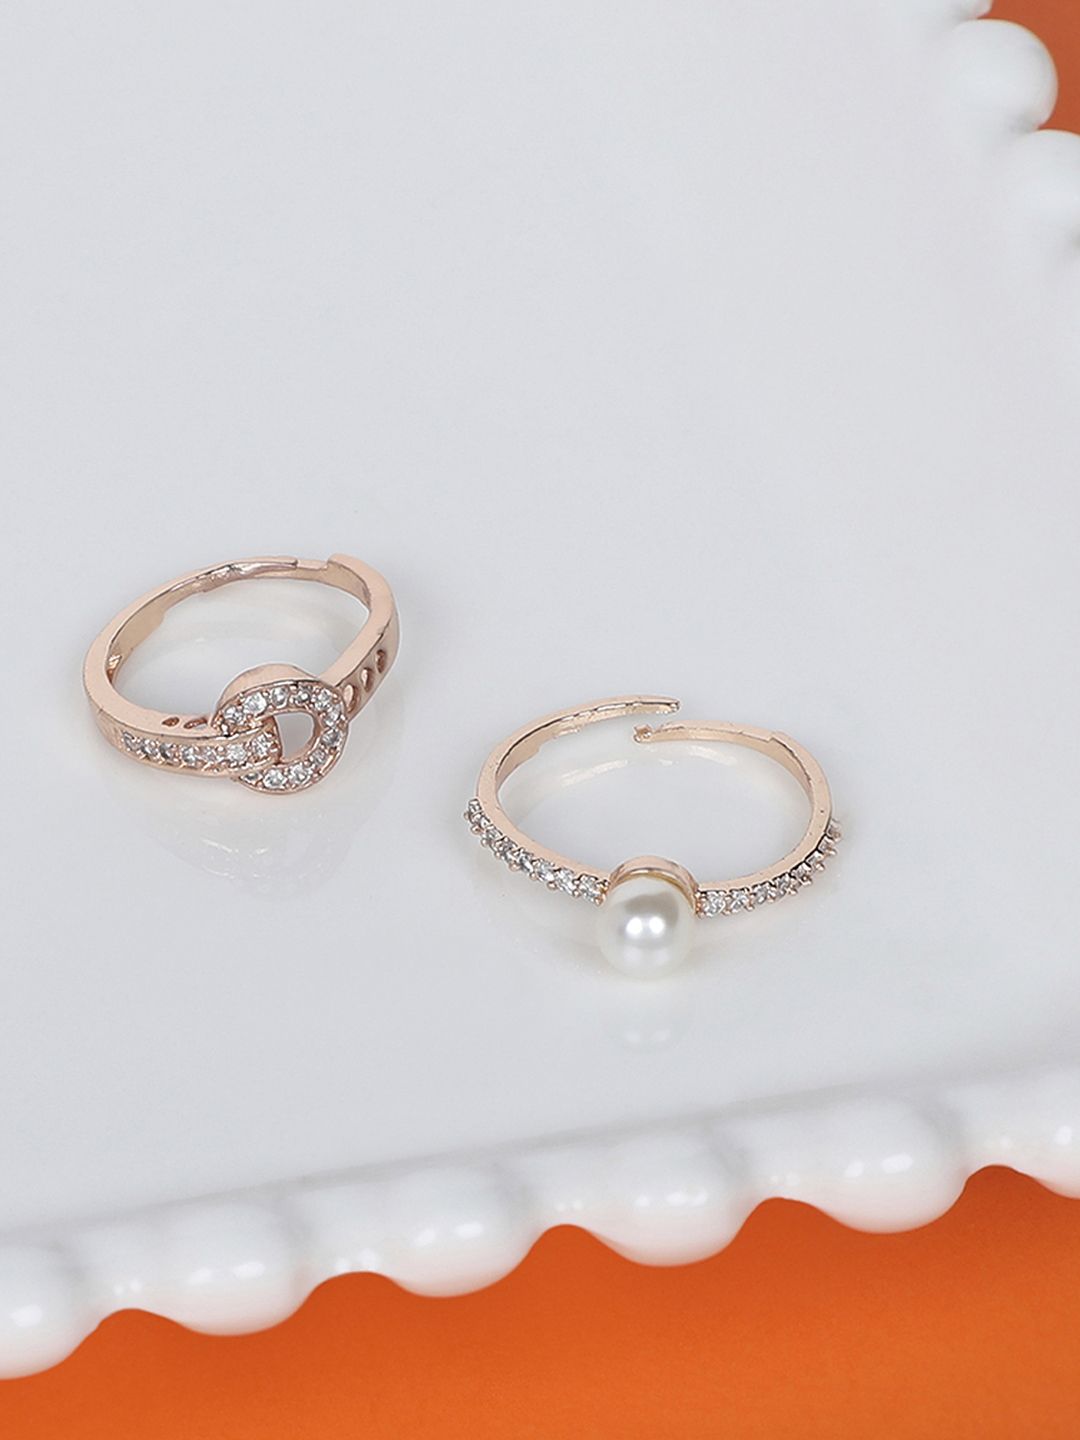 Zaveri Pearls Set Of 2 Rose Gold-Plated & White CZ-Studded Adjustable Finger Rings Price in India